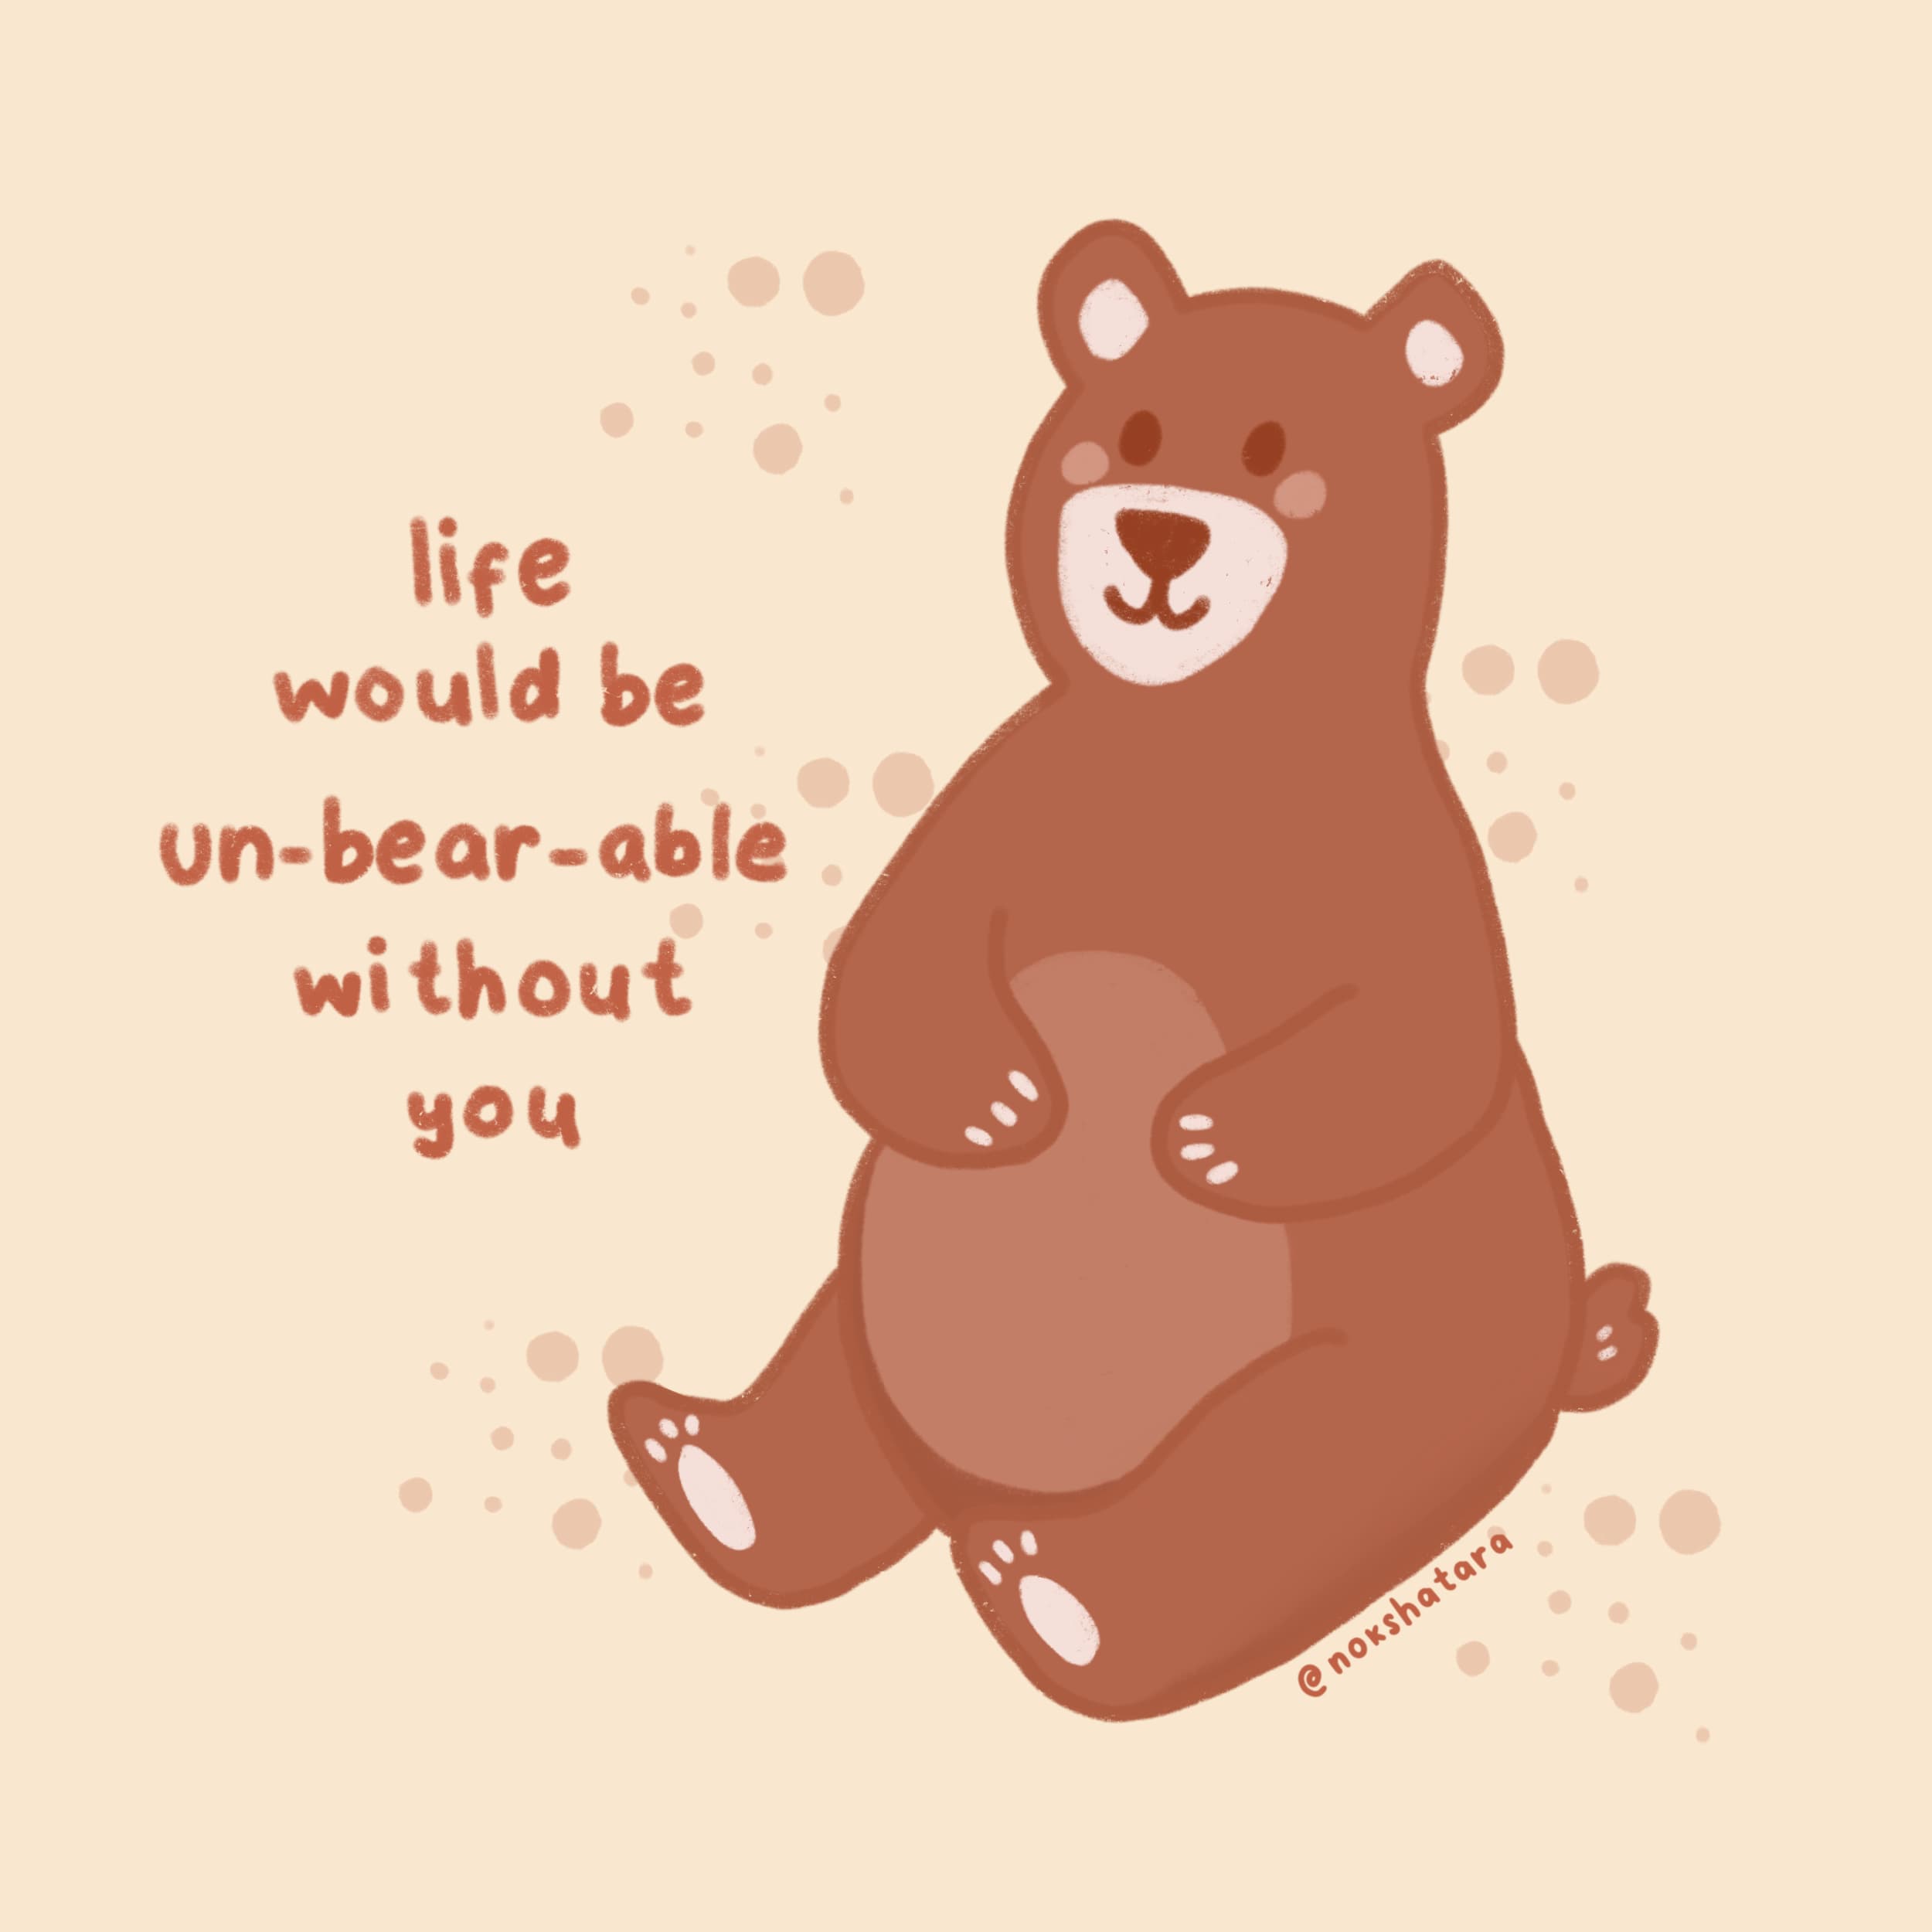 Illustration of a bear with the title life would be un-bear-able without you.